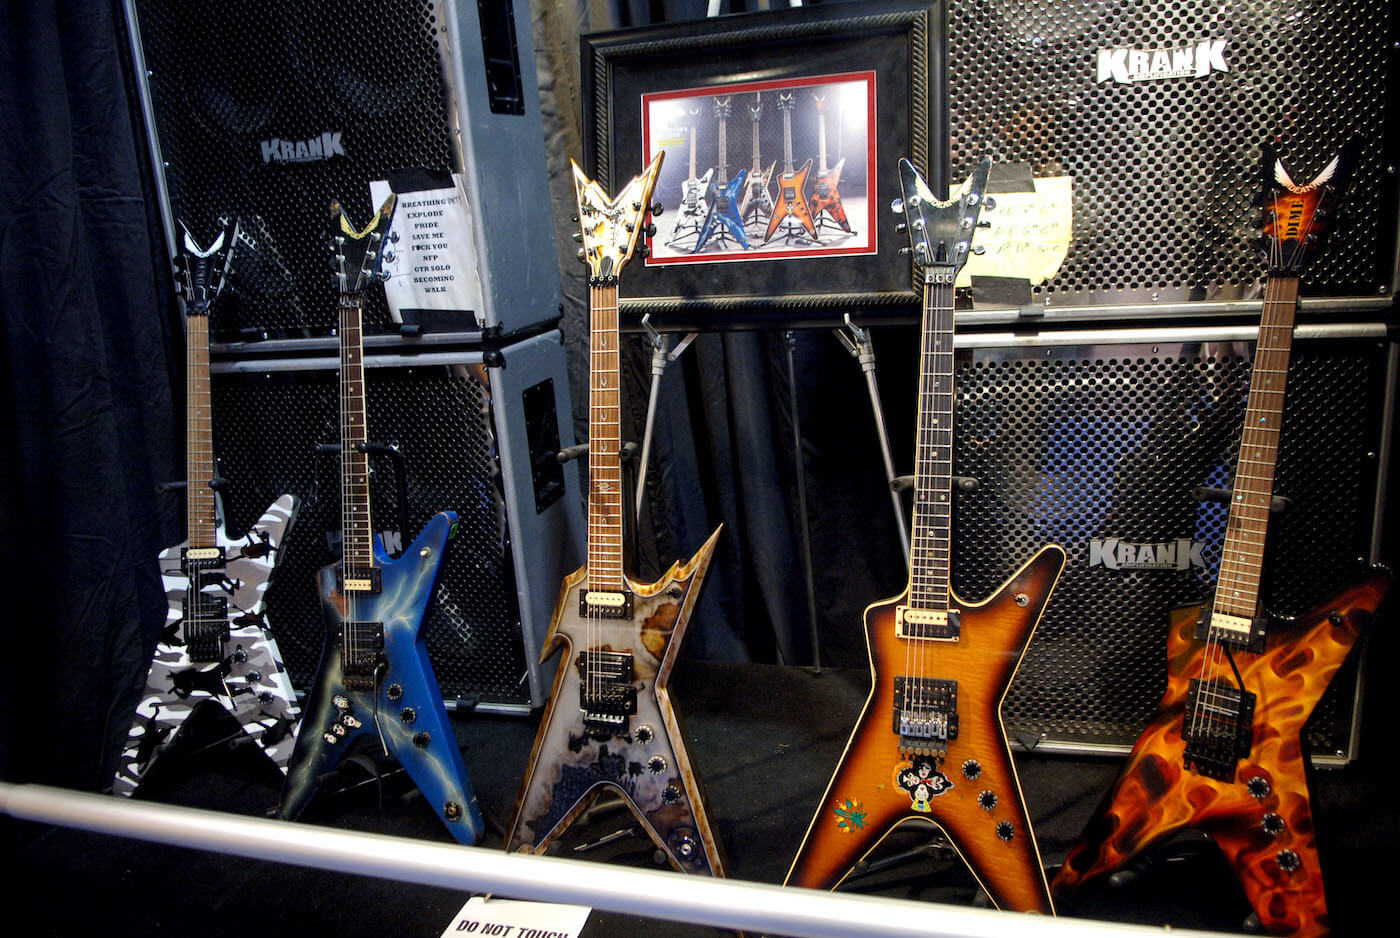 search dean guitars by serial number